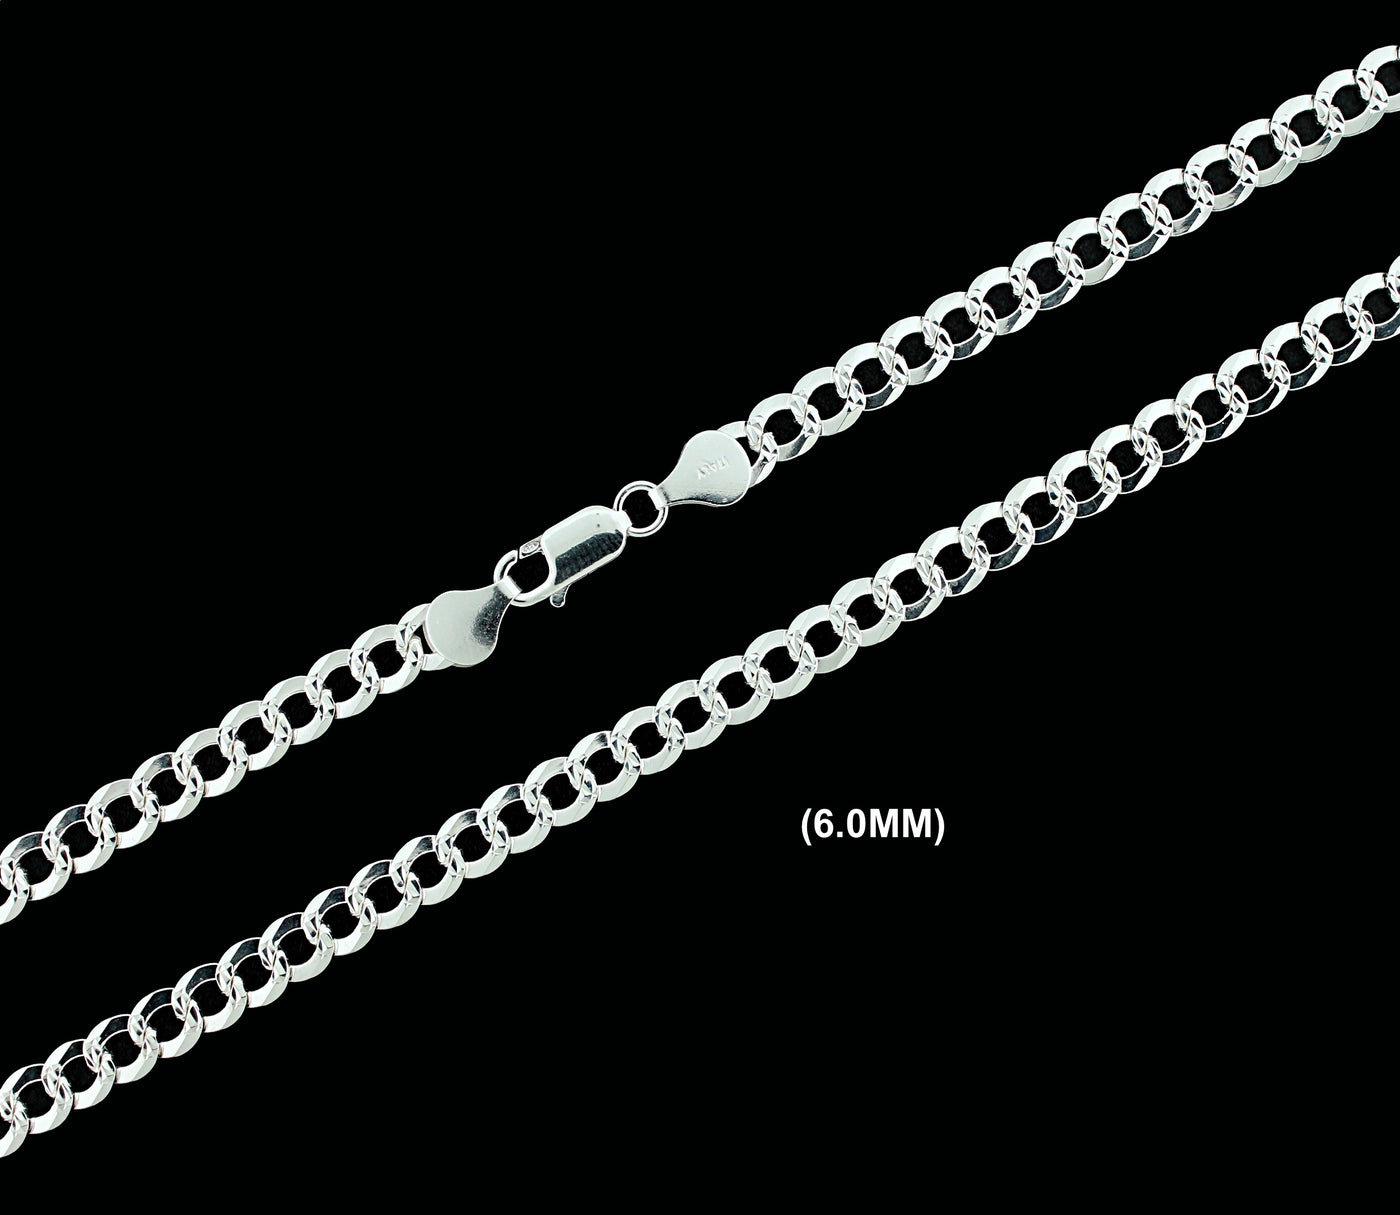 6MM Solid 925 Sterling Silver Diamond Cut Cuban Curb Chain Necklace or Bracelet ITALY